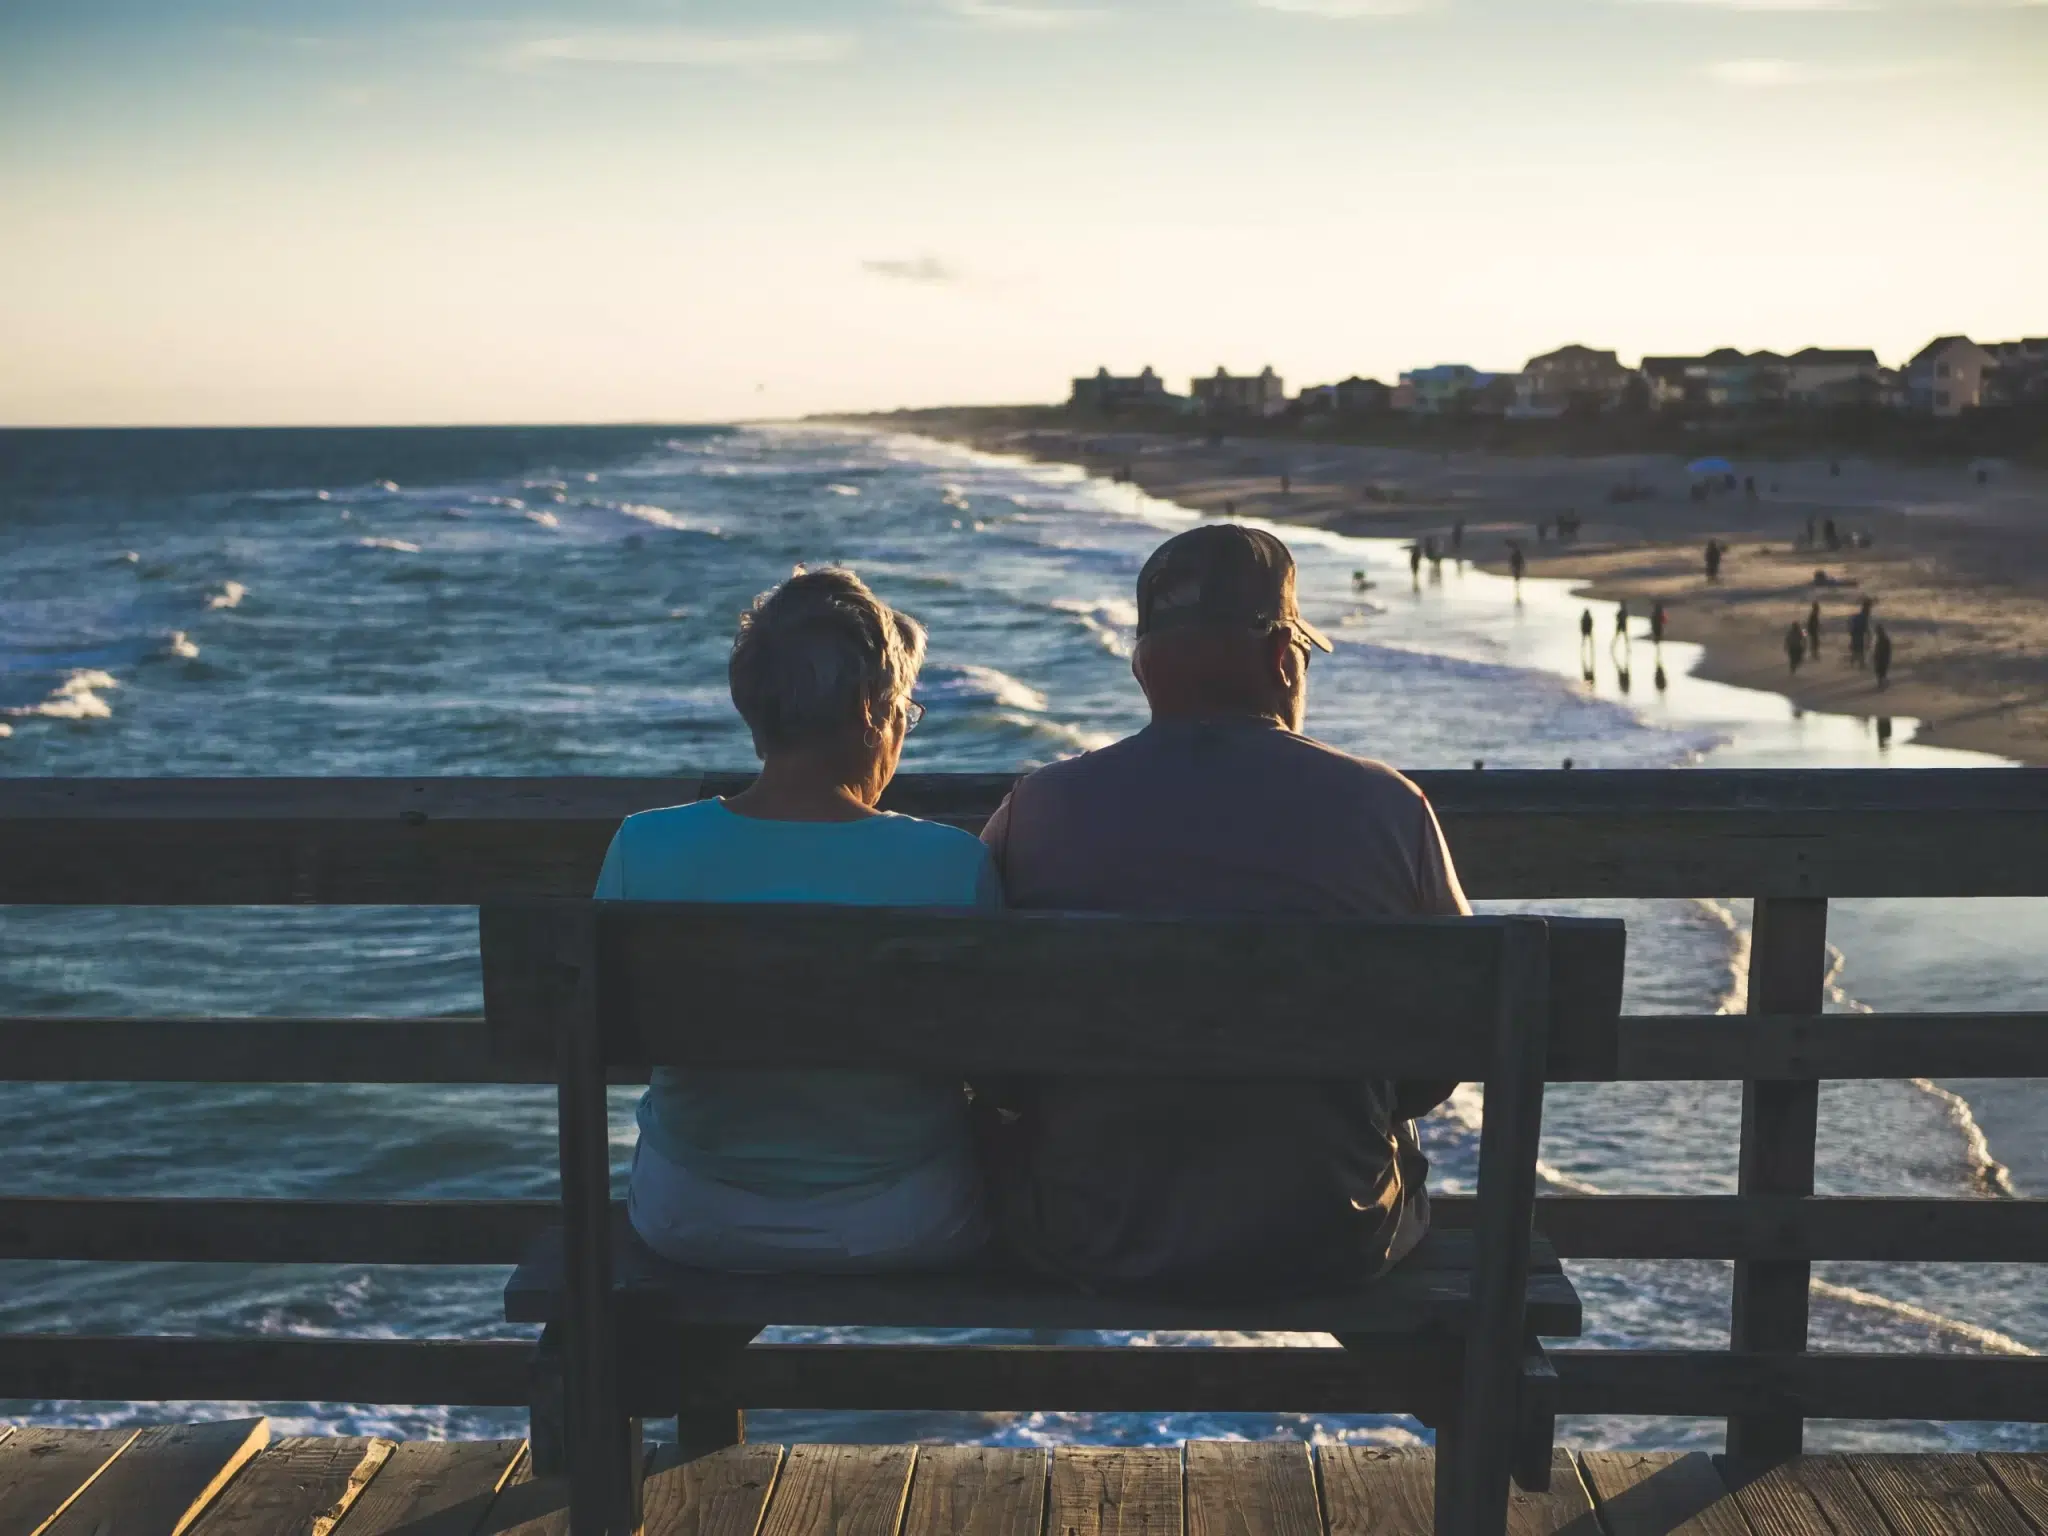 Couple sitting on a wooden chair overlooking the beach.